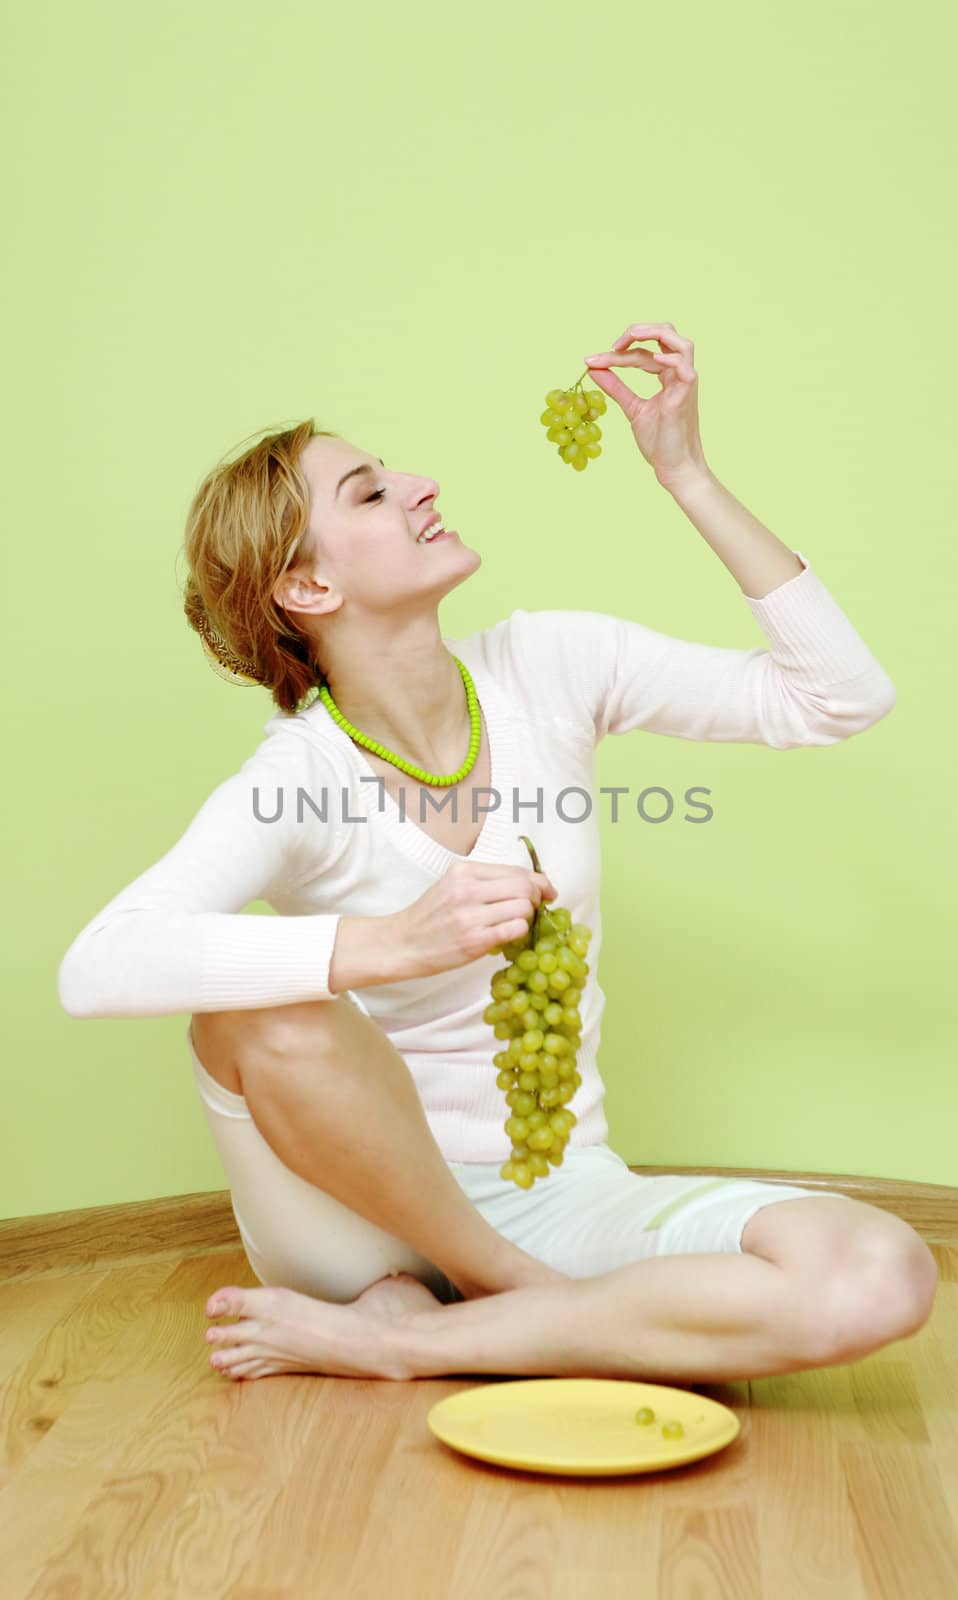 Girl with grapes by velkol